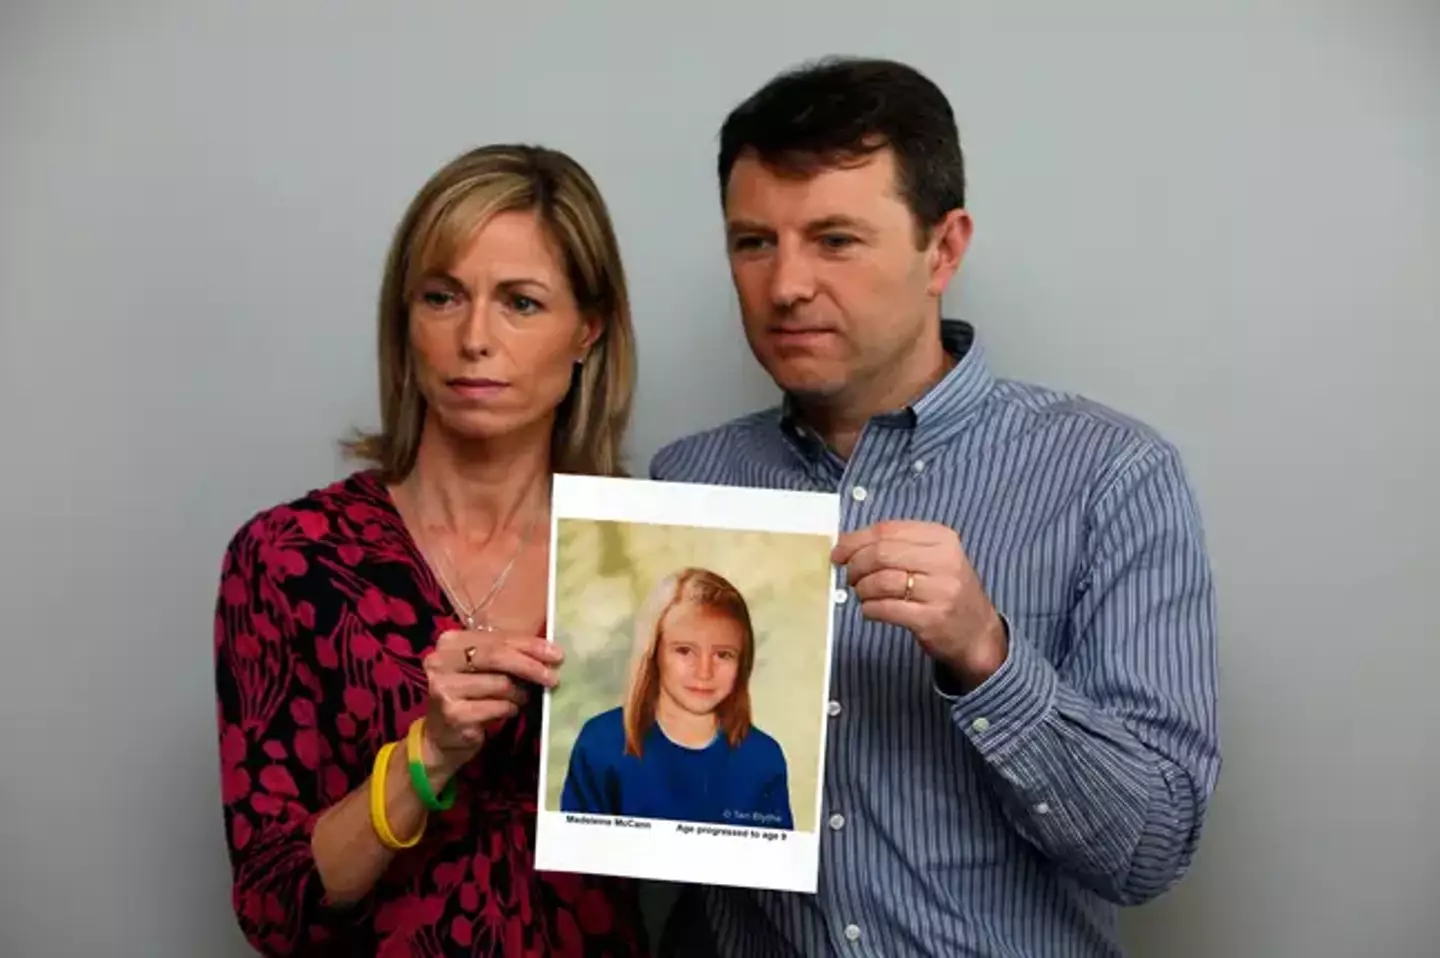 Kate and Gerry McCann have said they 'welcome' the news.